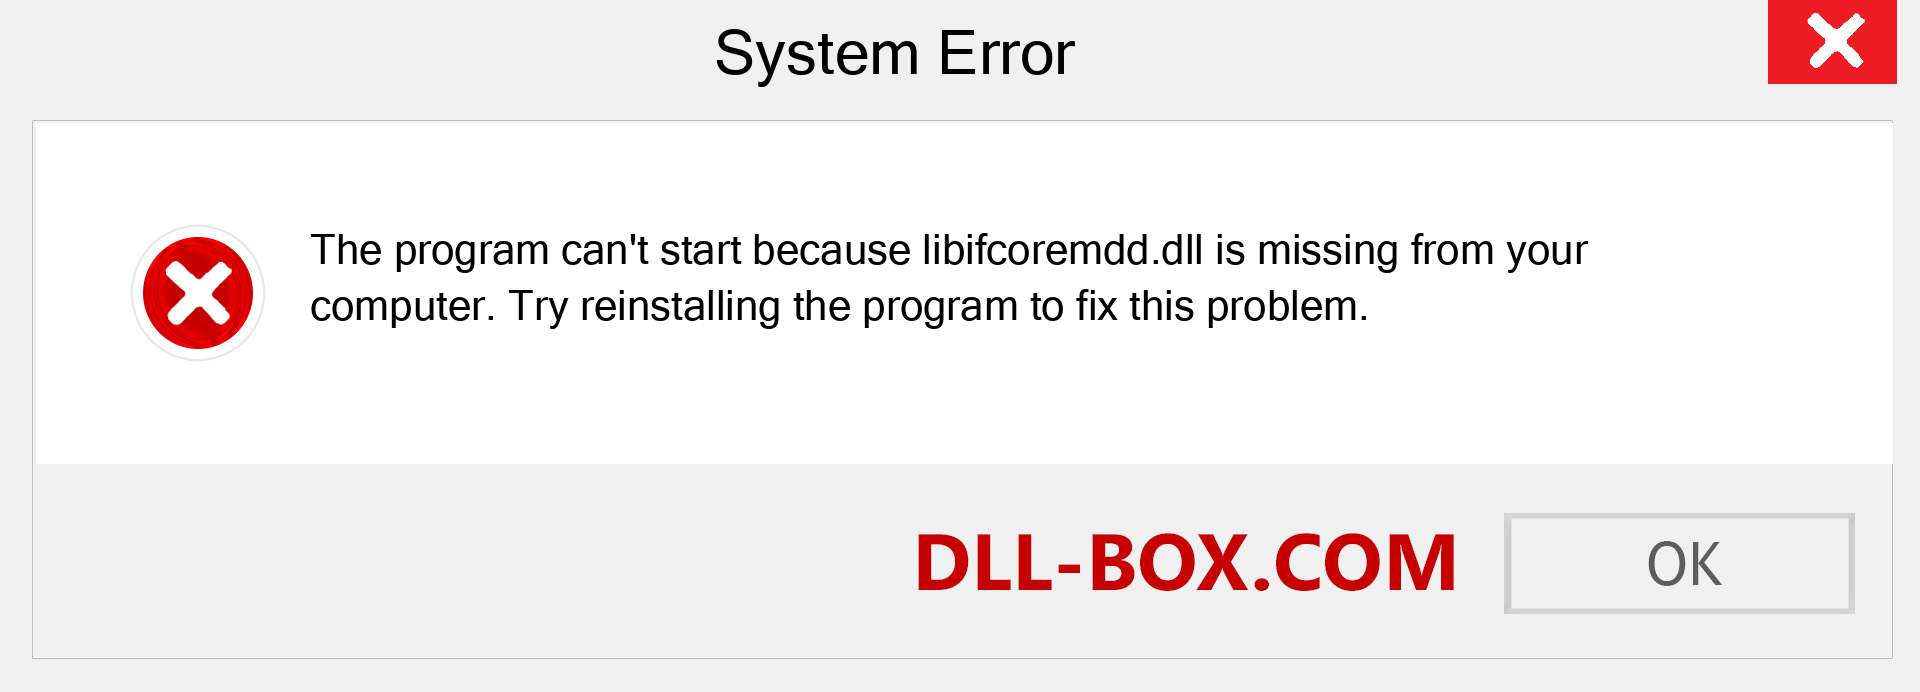  libifcoremdd.dll file is missing?. Download for Windows 7, 8, 10 - Fix  libifcoremdd dll Missing Error on Windows, photos, images